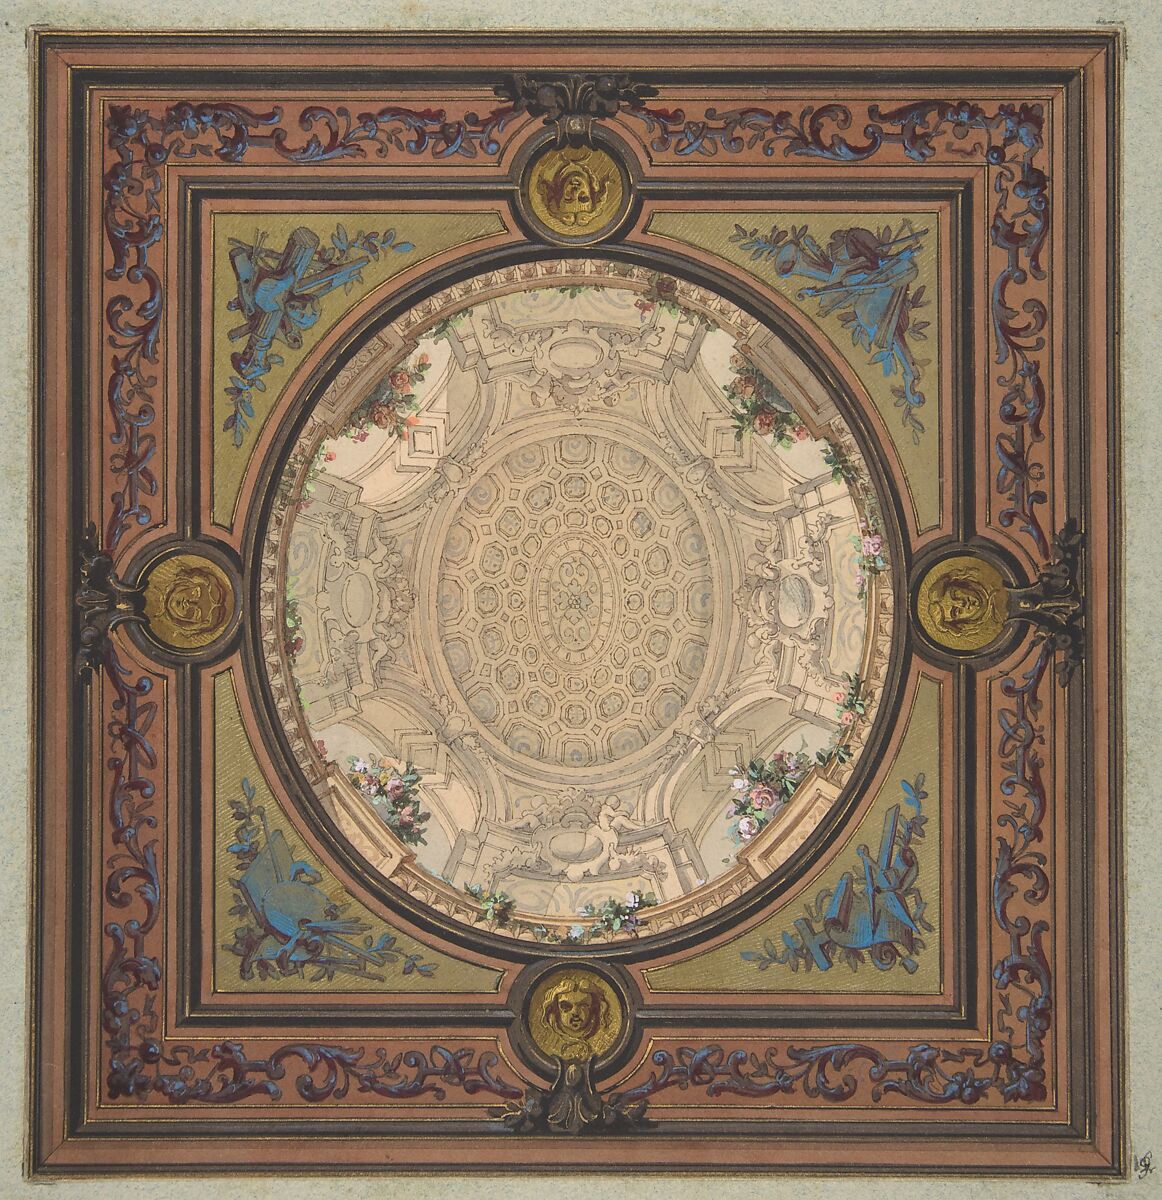 Design for the decoration of a ceiling with a trompe l'oeil painting of a coffered dome, Jules-Edmond-Charles Lachaise (French, died 1897), Graphite, pen and ink, watercolor and gold paint on wove paper; mounted on blue wove paper 